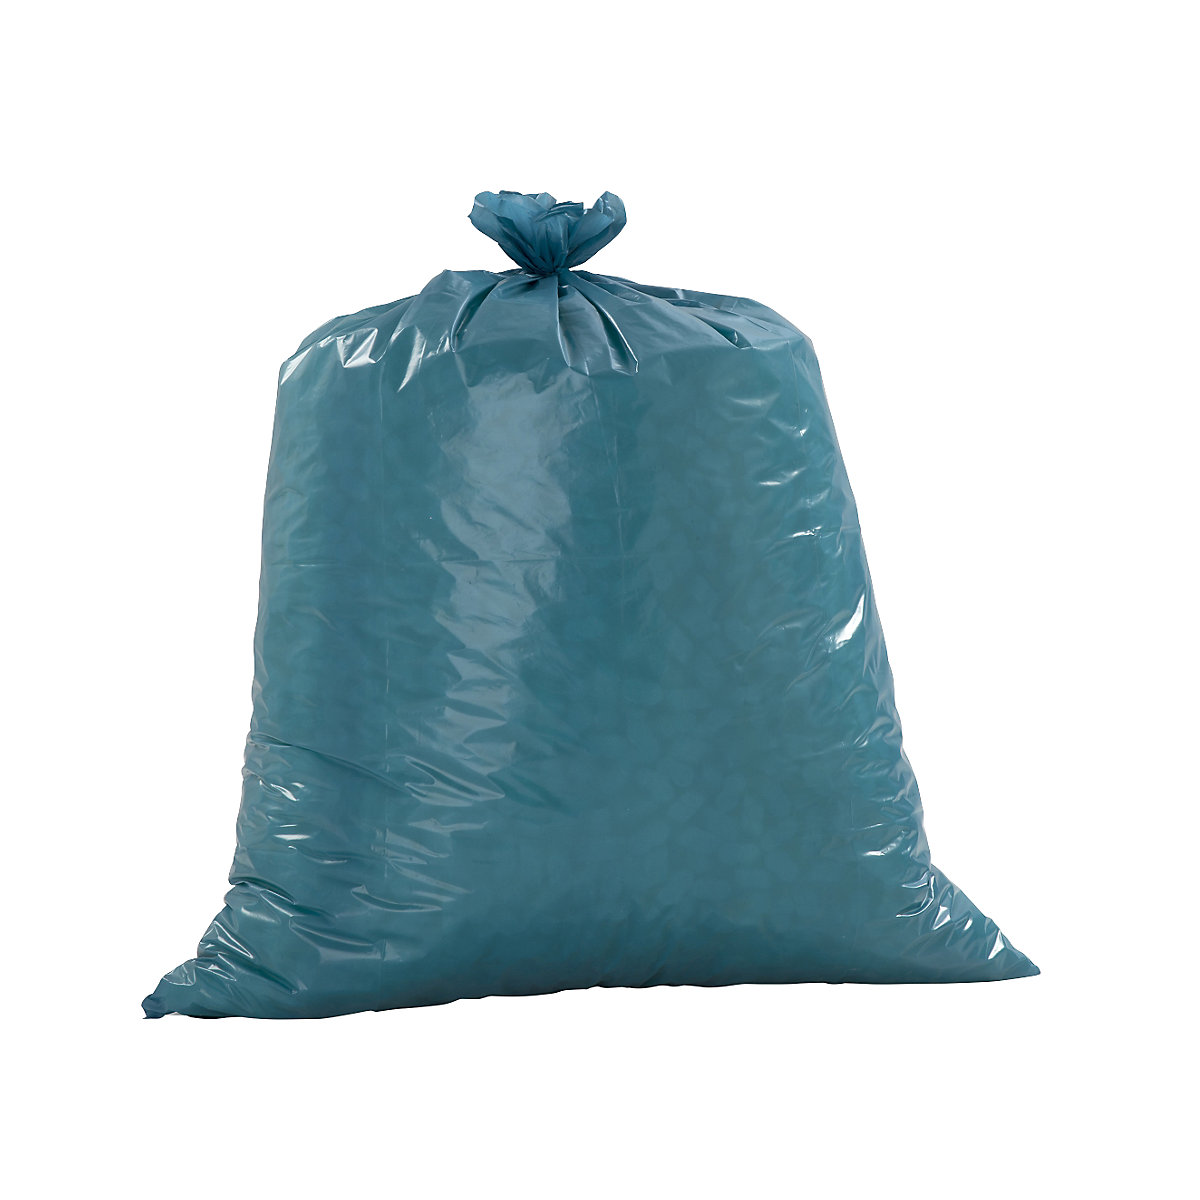 Standard waste sacks, LDPE, capacity 120 l, BxH 800 x 1000 mm, pack of 250, material thickness 40 µm, blue